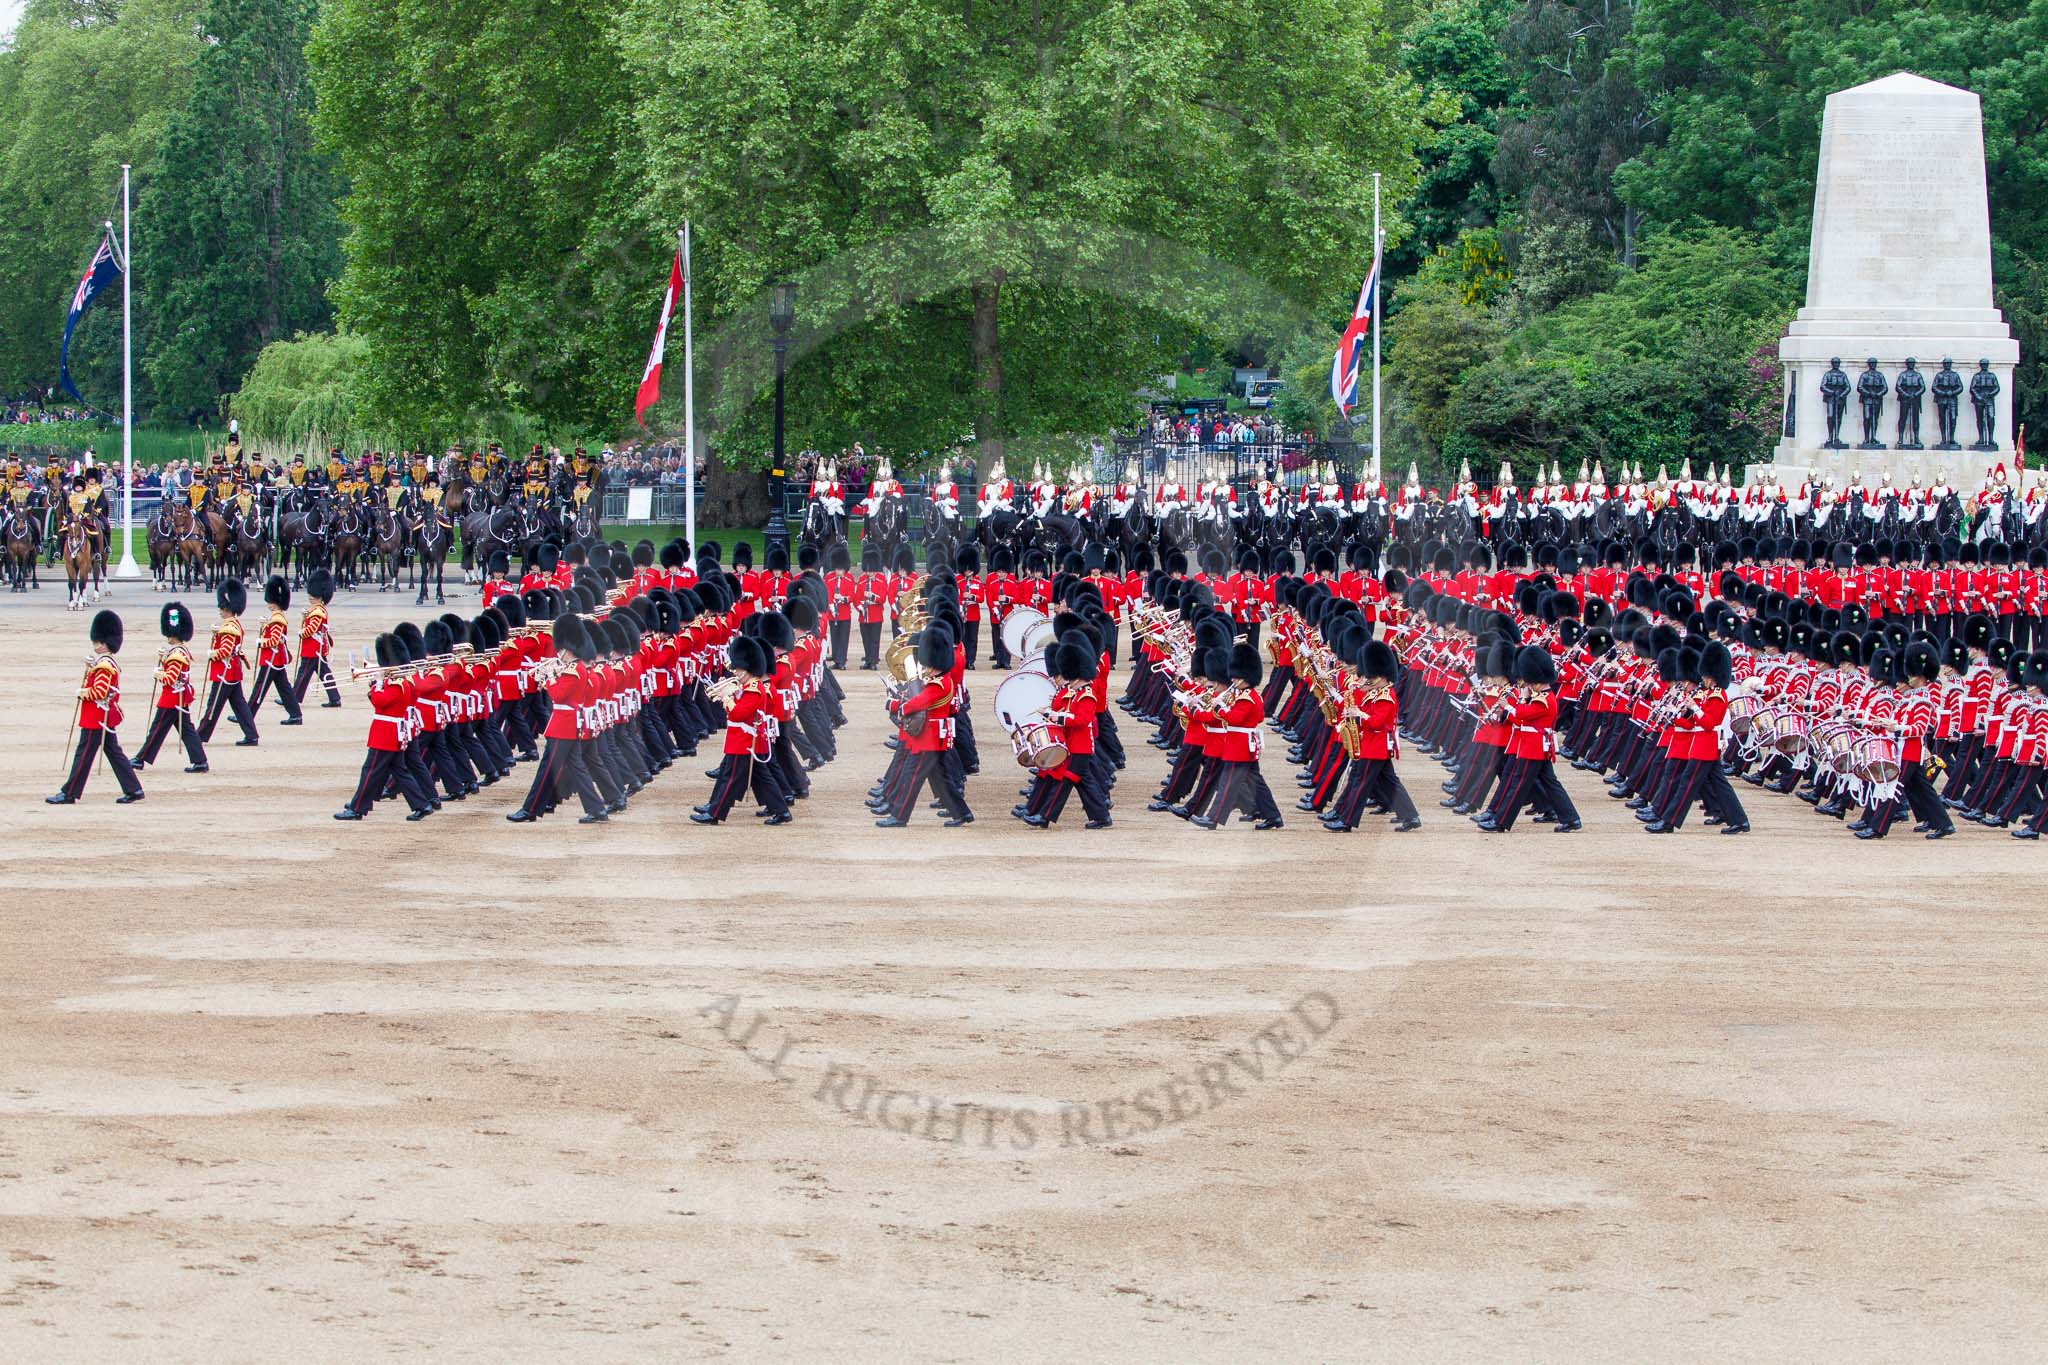 Major General's Review 2013: The five Drum Majors leading the Massed Bands as they are playing the Grenadiers Slow March..
Horse Guards Parade, Westminster,
London SW1,

United Kingdom,
on 01 June 2013 at 11:23, image #425